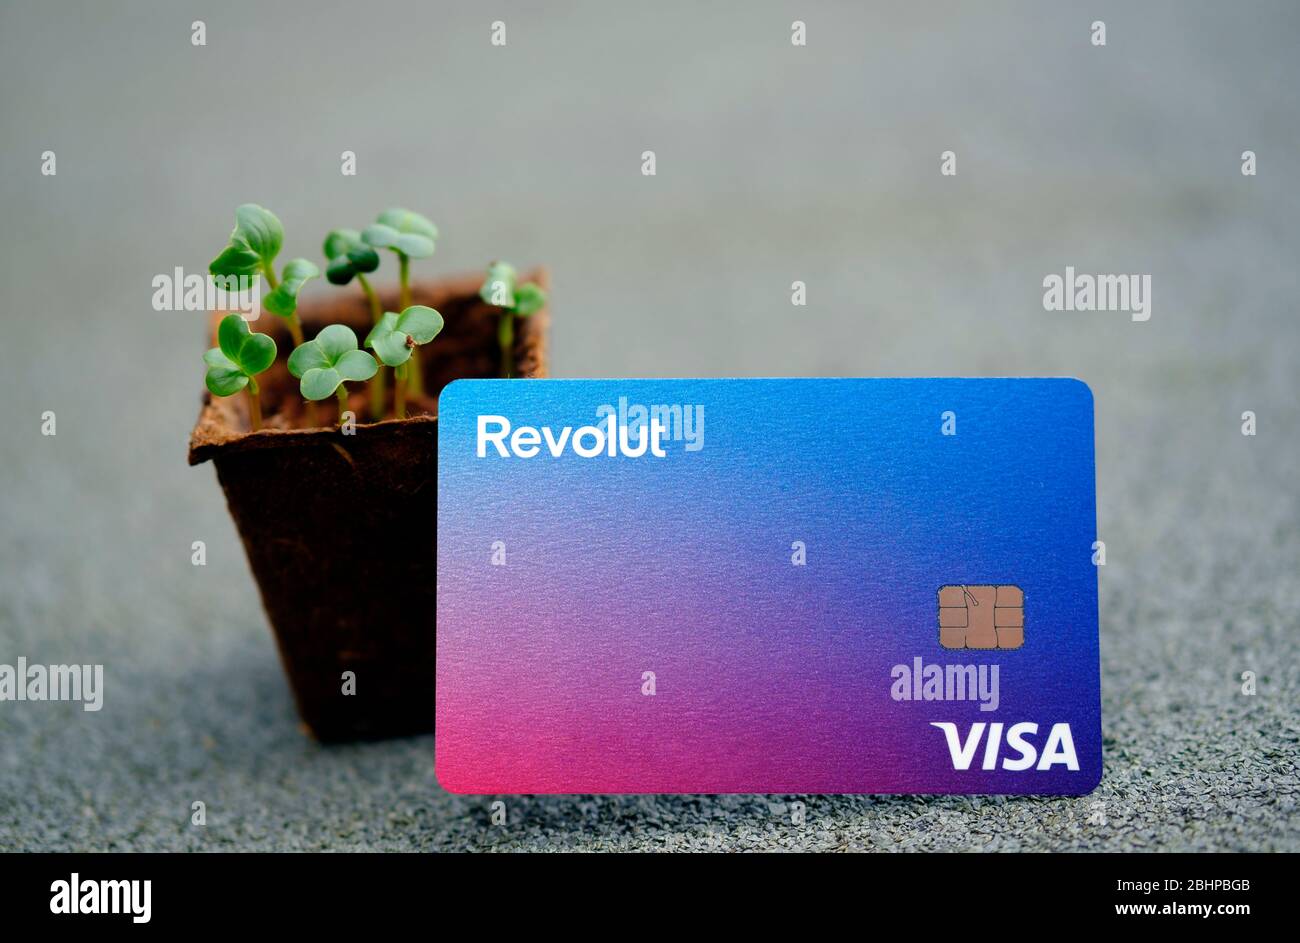 Stone / United Kingdom - April 26 2020: Revolut bank card placed next to a pot with a new plant. Concept for growth of business. Stock Photo